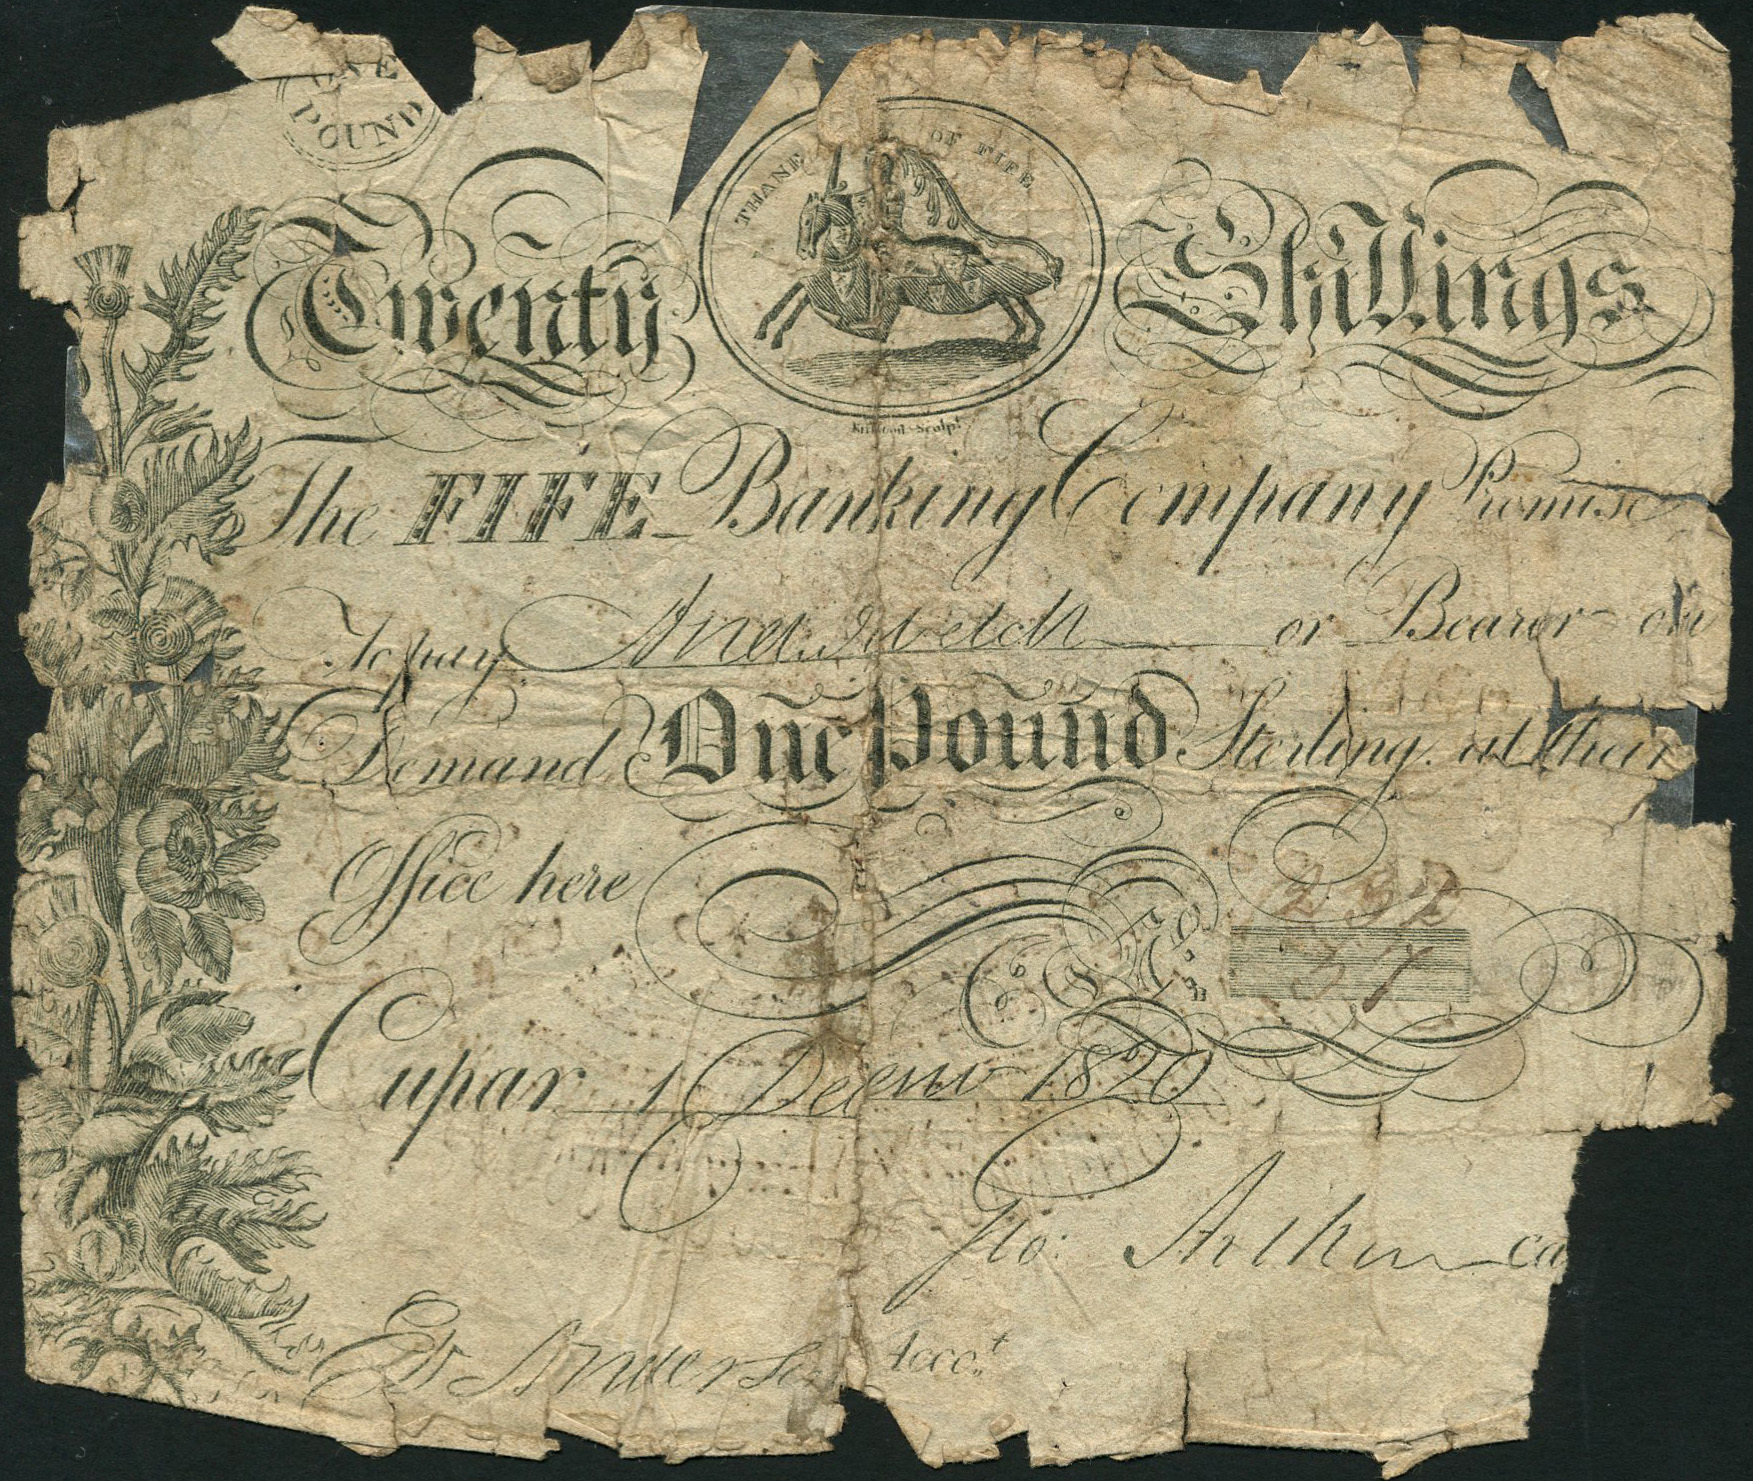 Fife Banking Company one pound note forgery, dated December 1, 1820 and featuring the word ‘Cupar’ and an image of the Thane of Fife on horseback. Pre-sale estimates are £100-£150 